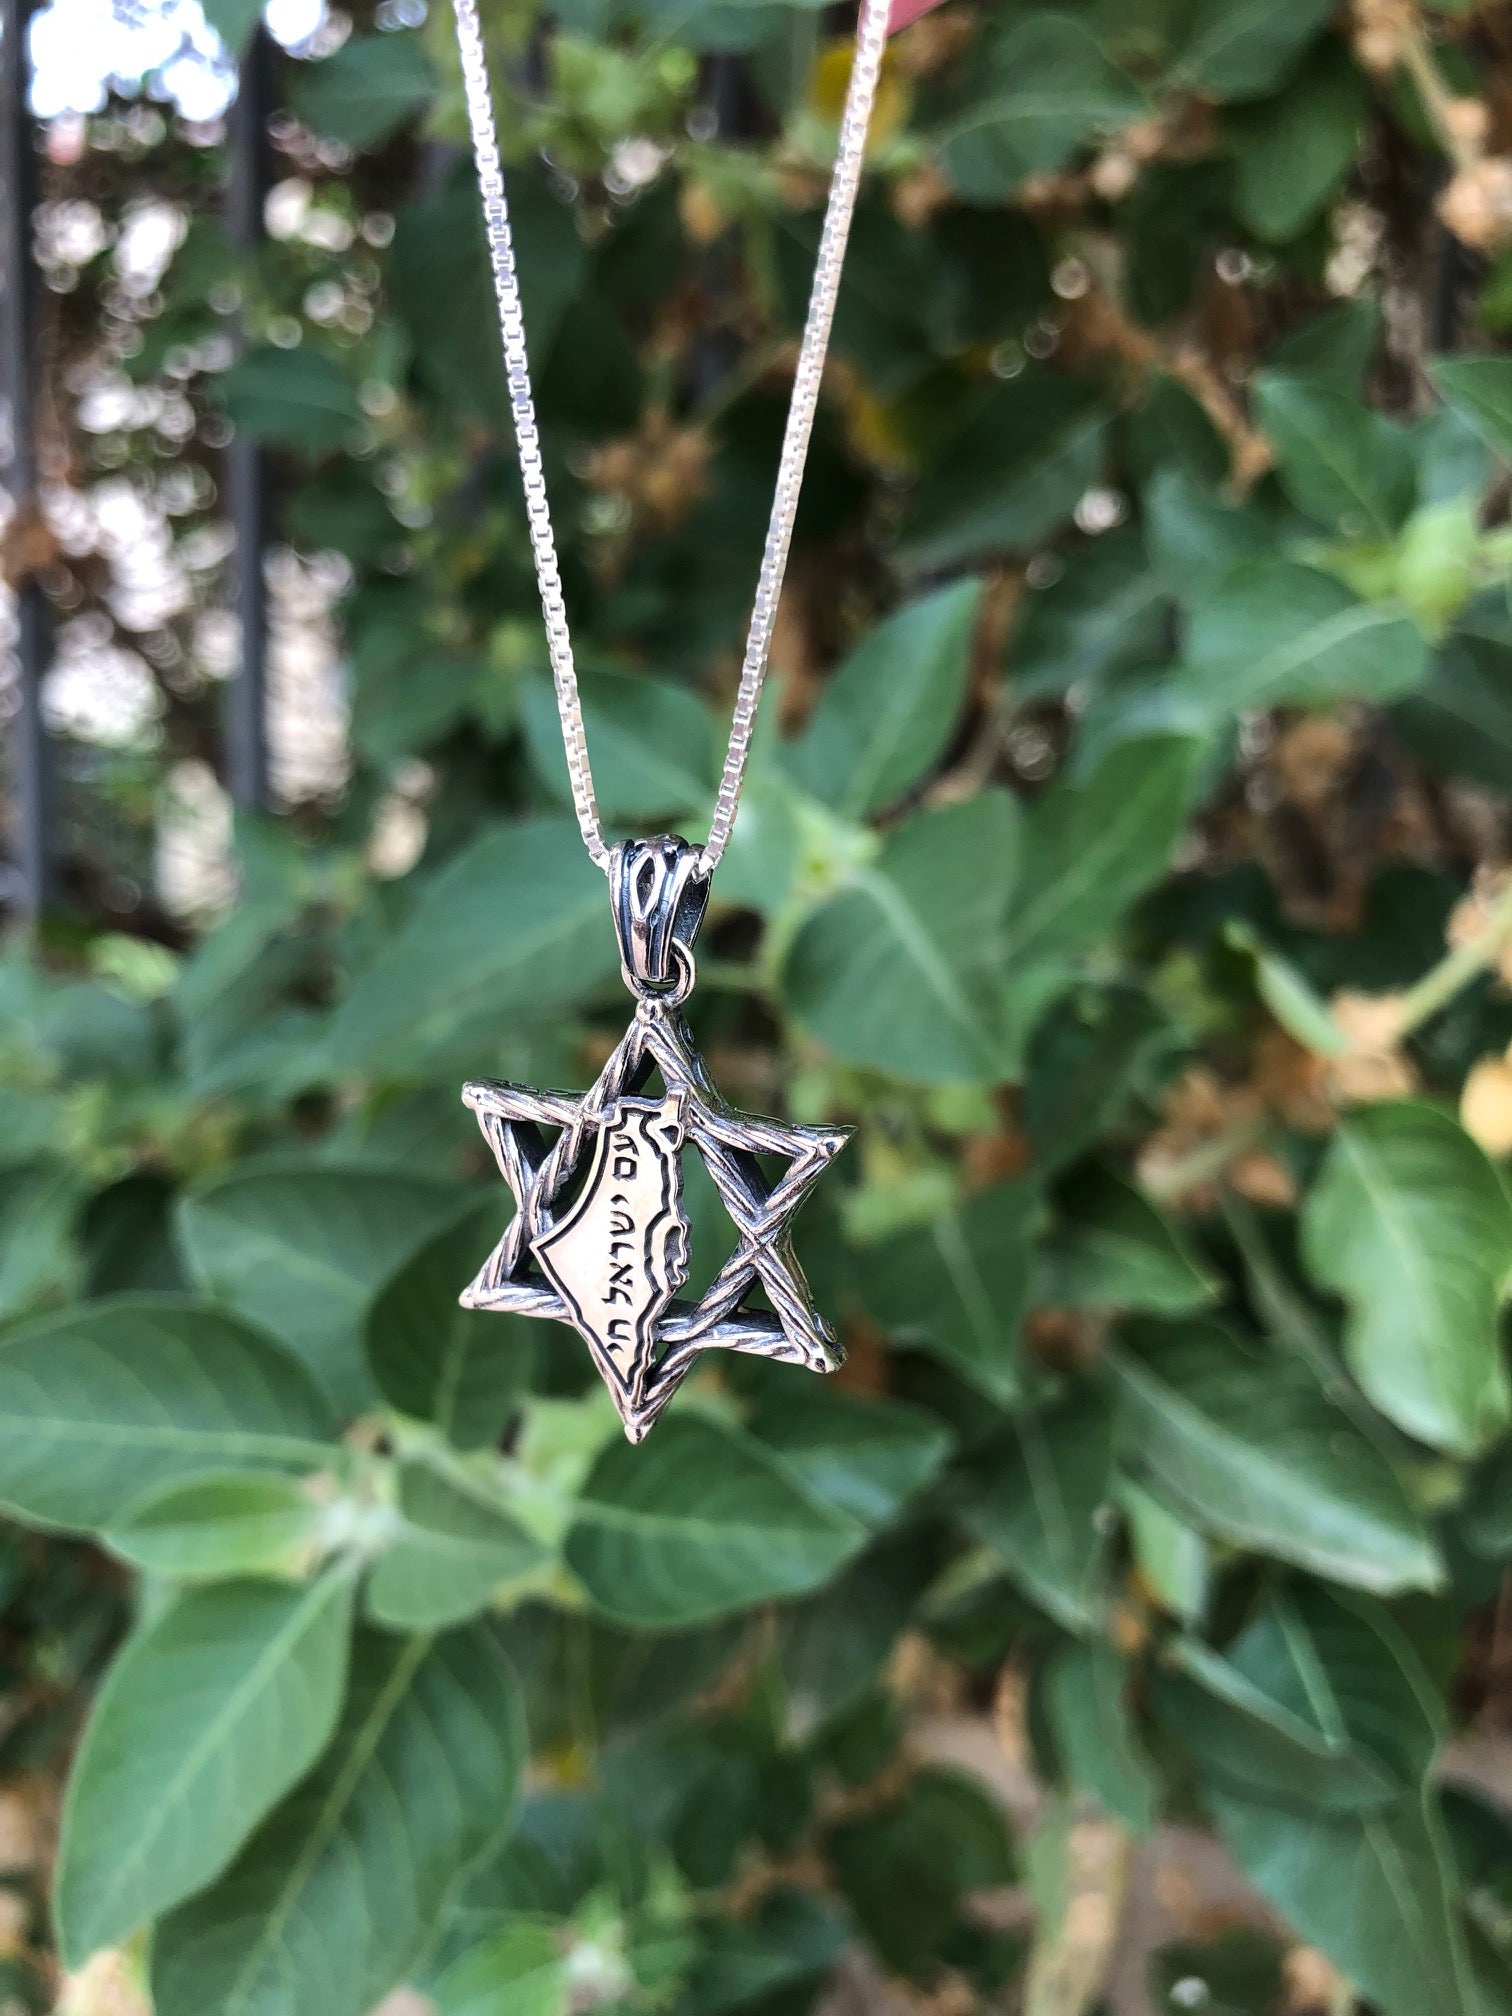 Star of David Necklace in Silver| Israel Jewelry Holy Land - Map of Israel Design | עם ישראל חי | Am Yisrael Chai | Israeli Gift Necklace